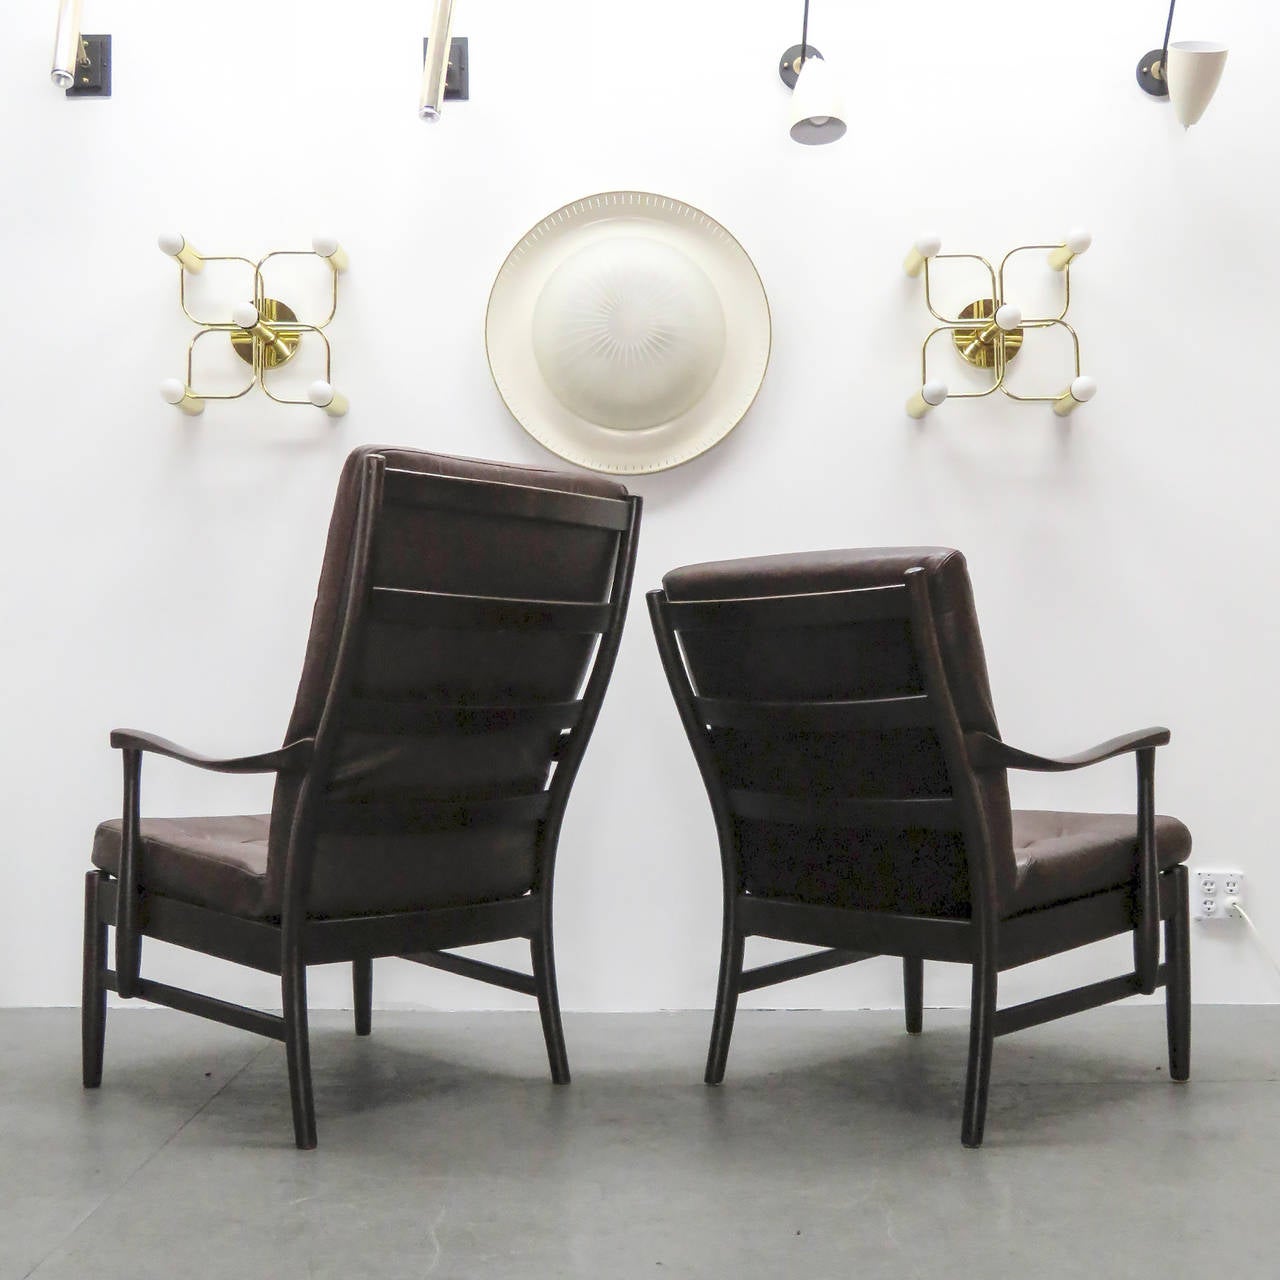 Mid-20th Century Set of Two Danish Leather Side Chairs, 1950